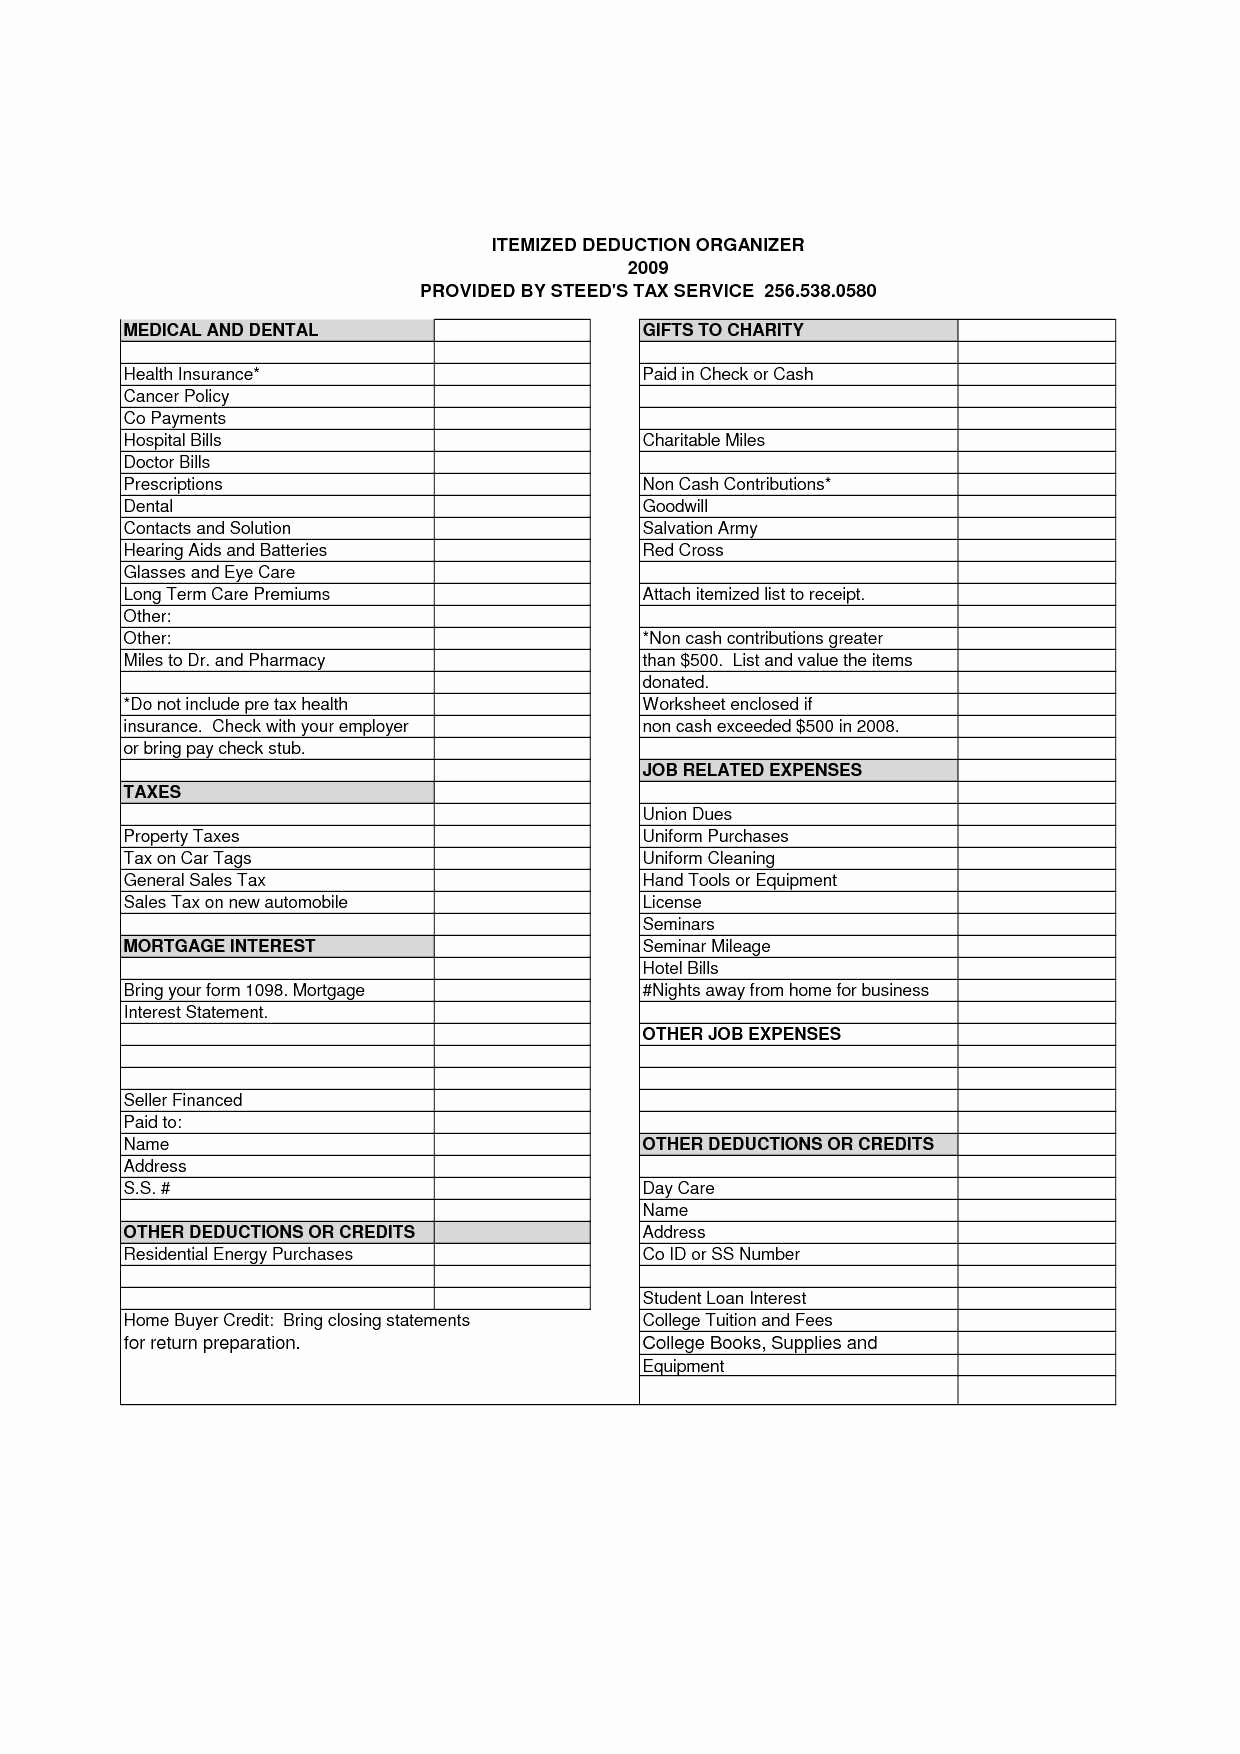 Goodwill Donation Spreadsheet Template Awesome Itemized Deductions Spreadsheet Printable Spreadshee